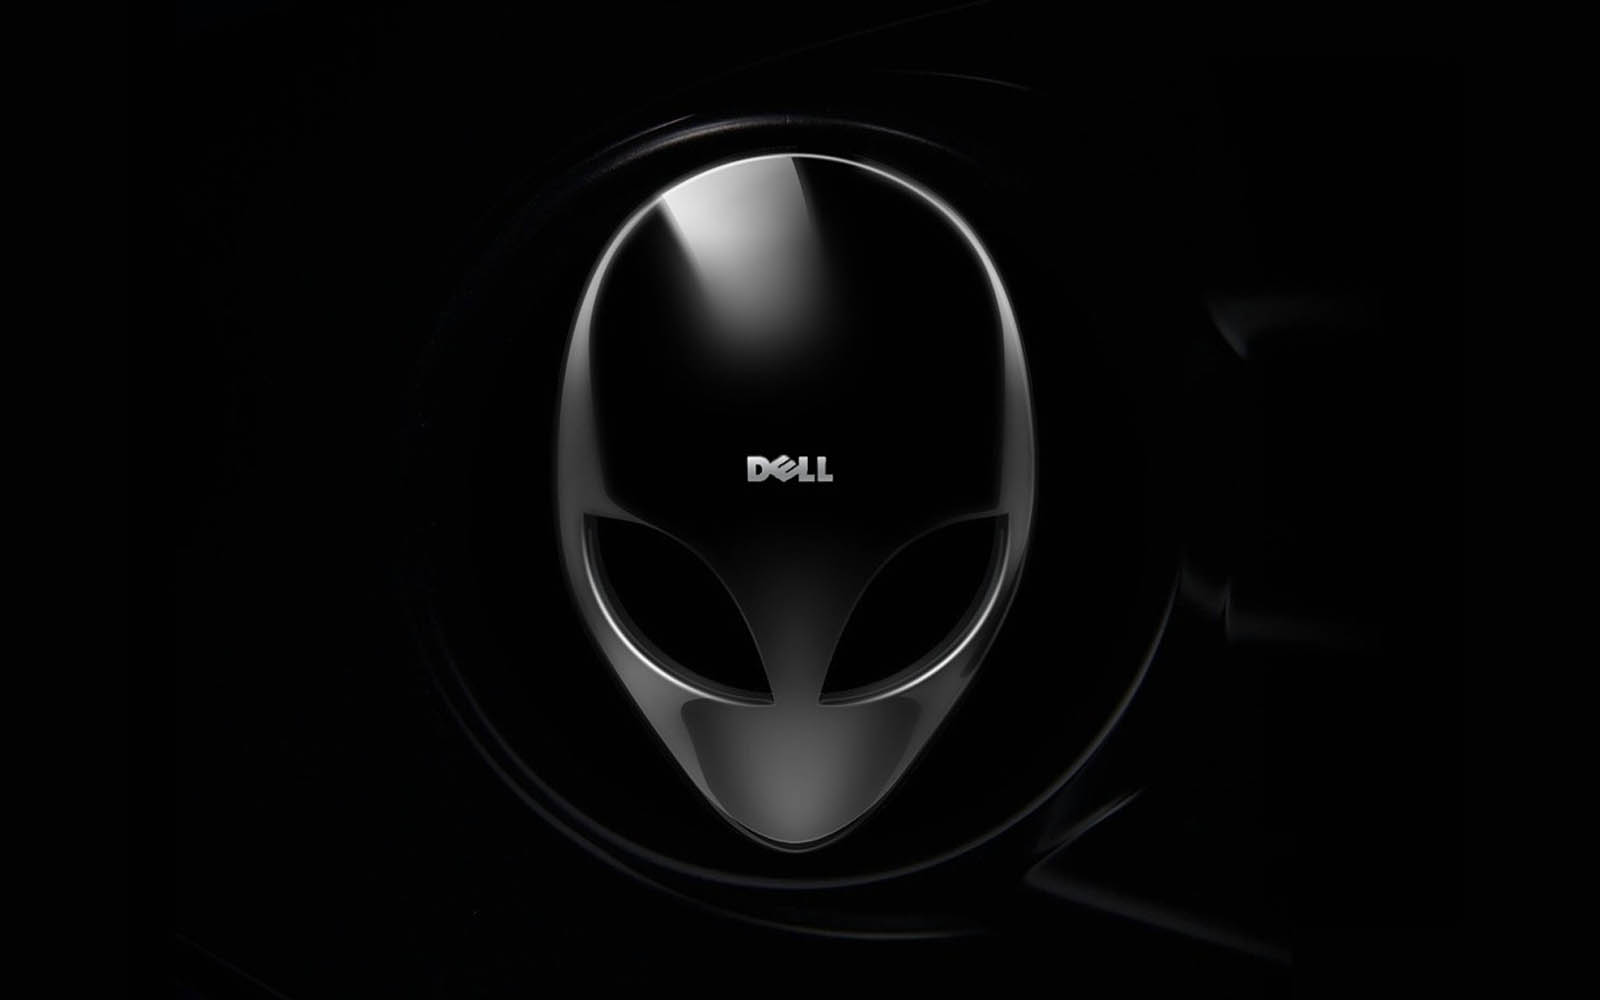 Tag Dell Wallpaper Image Photos Pictures And Background For